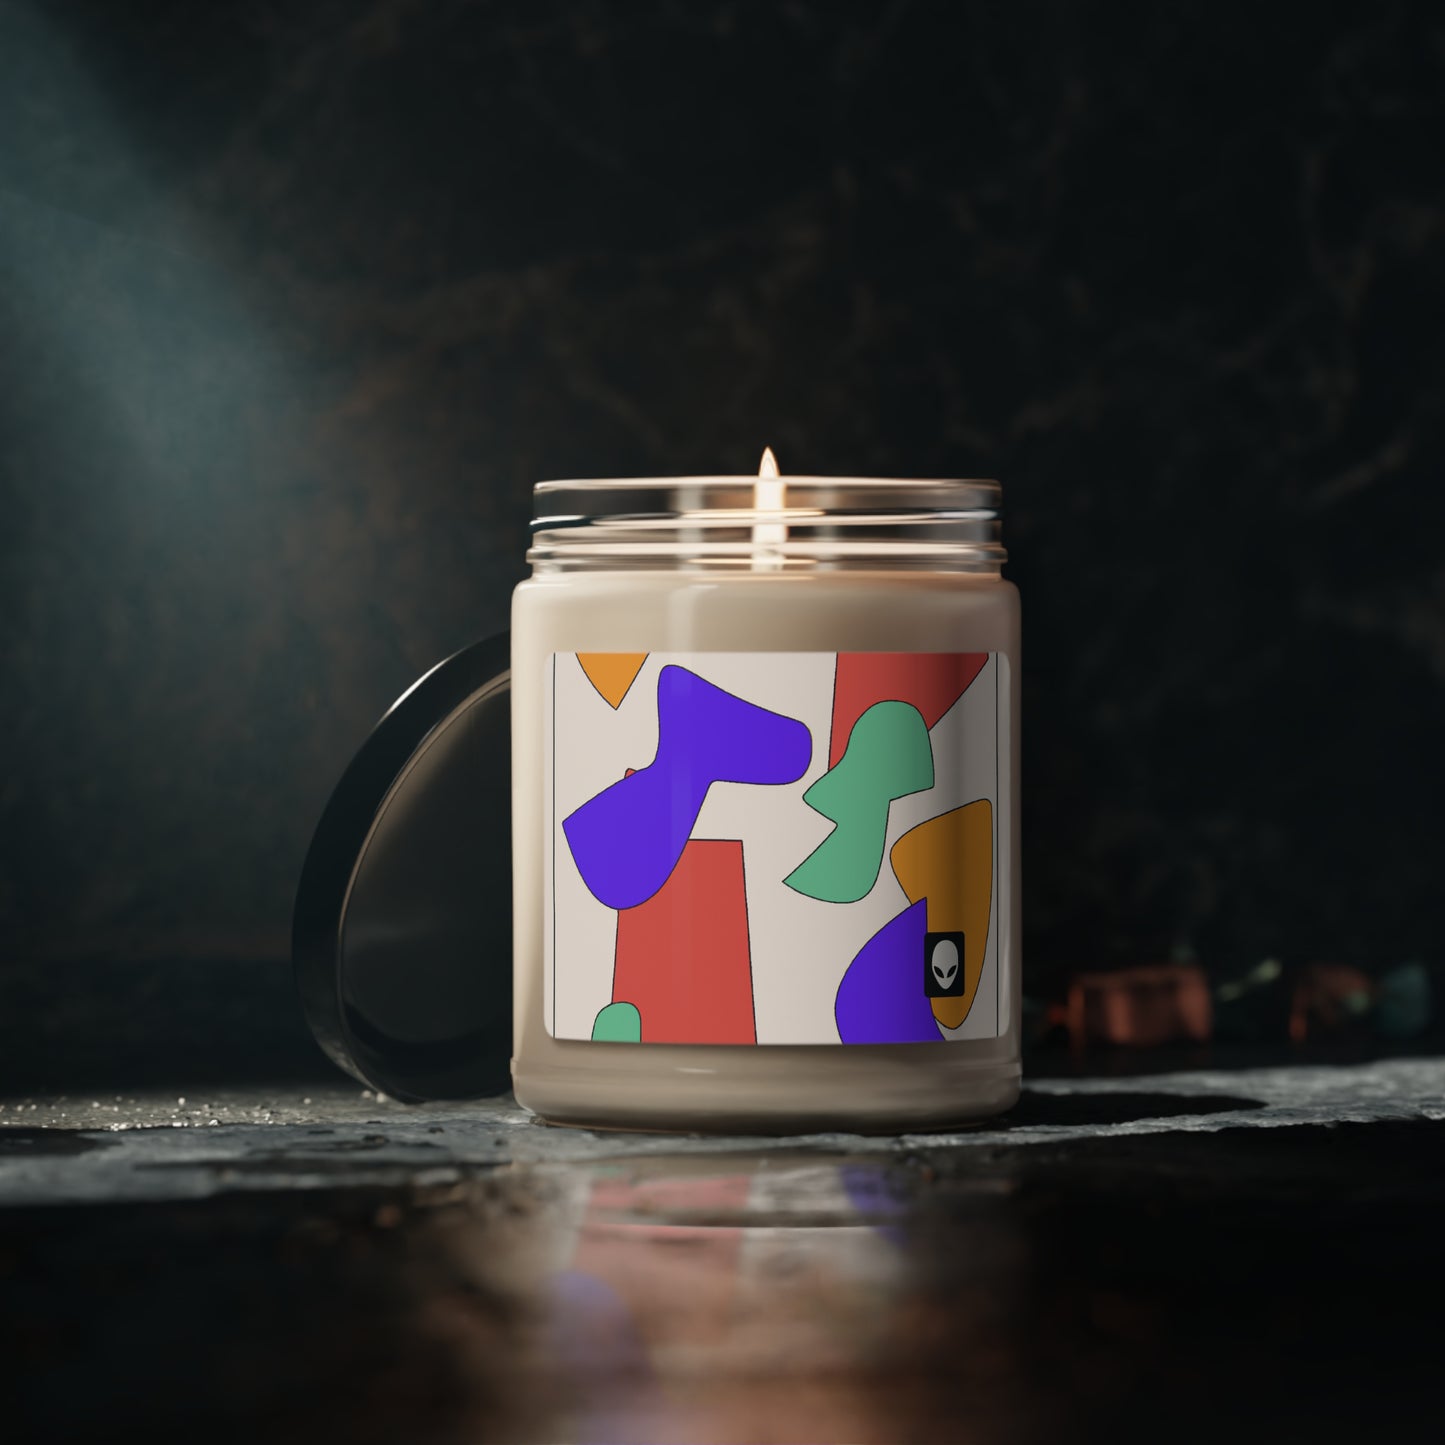 "A Beacon of Hope" - The Alien Eco-friendly Soy Candle